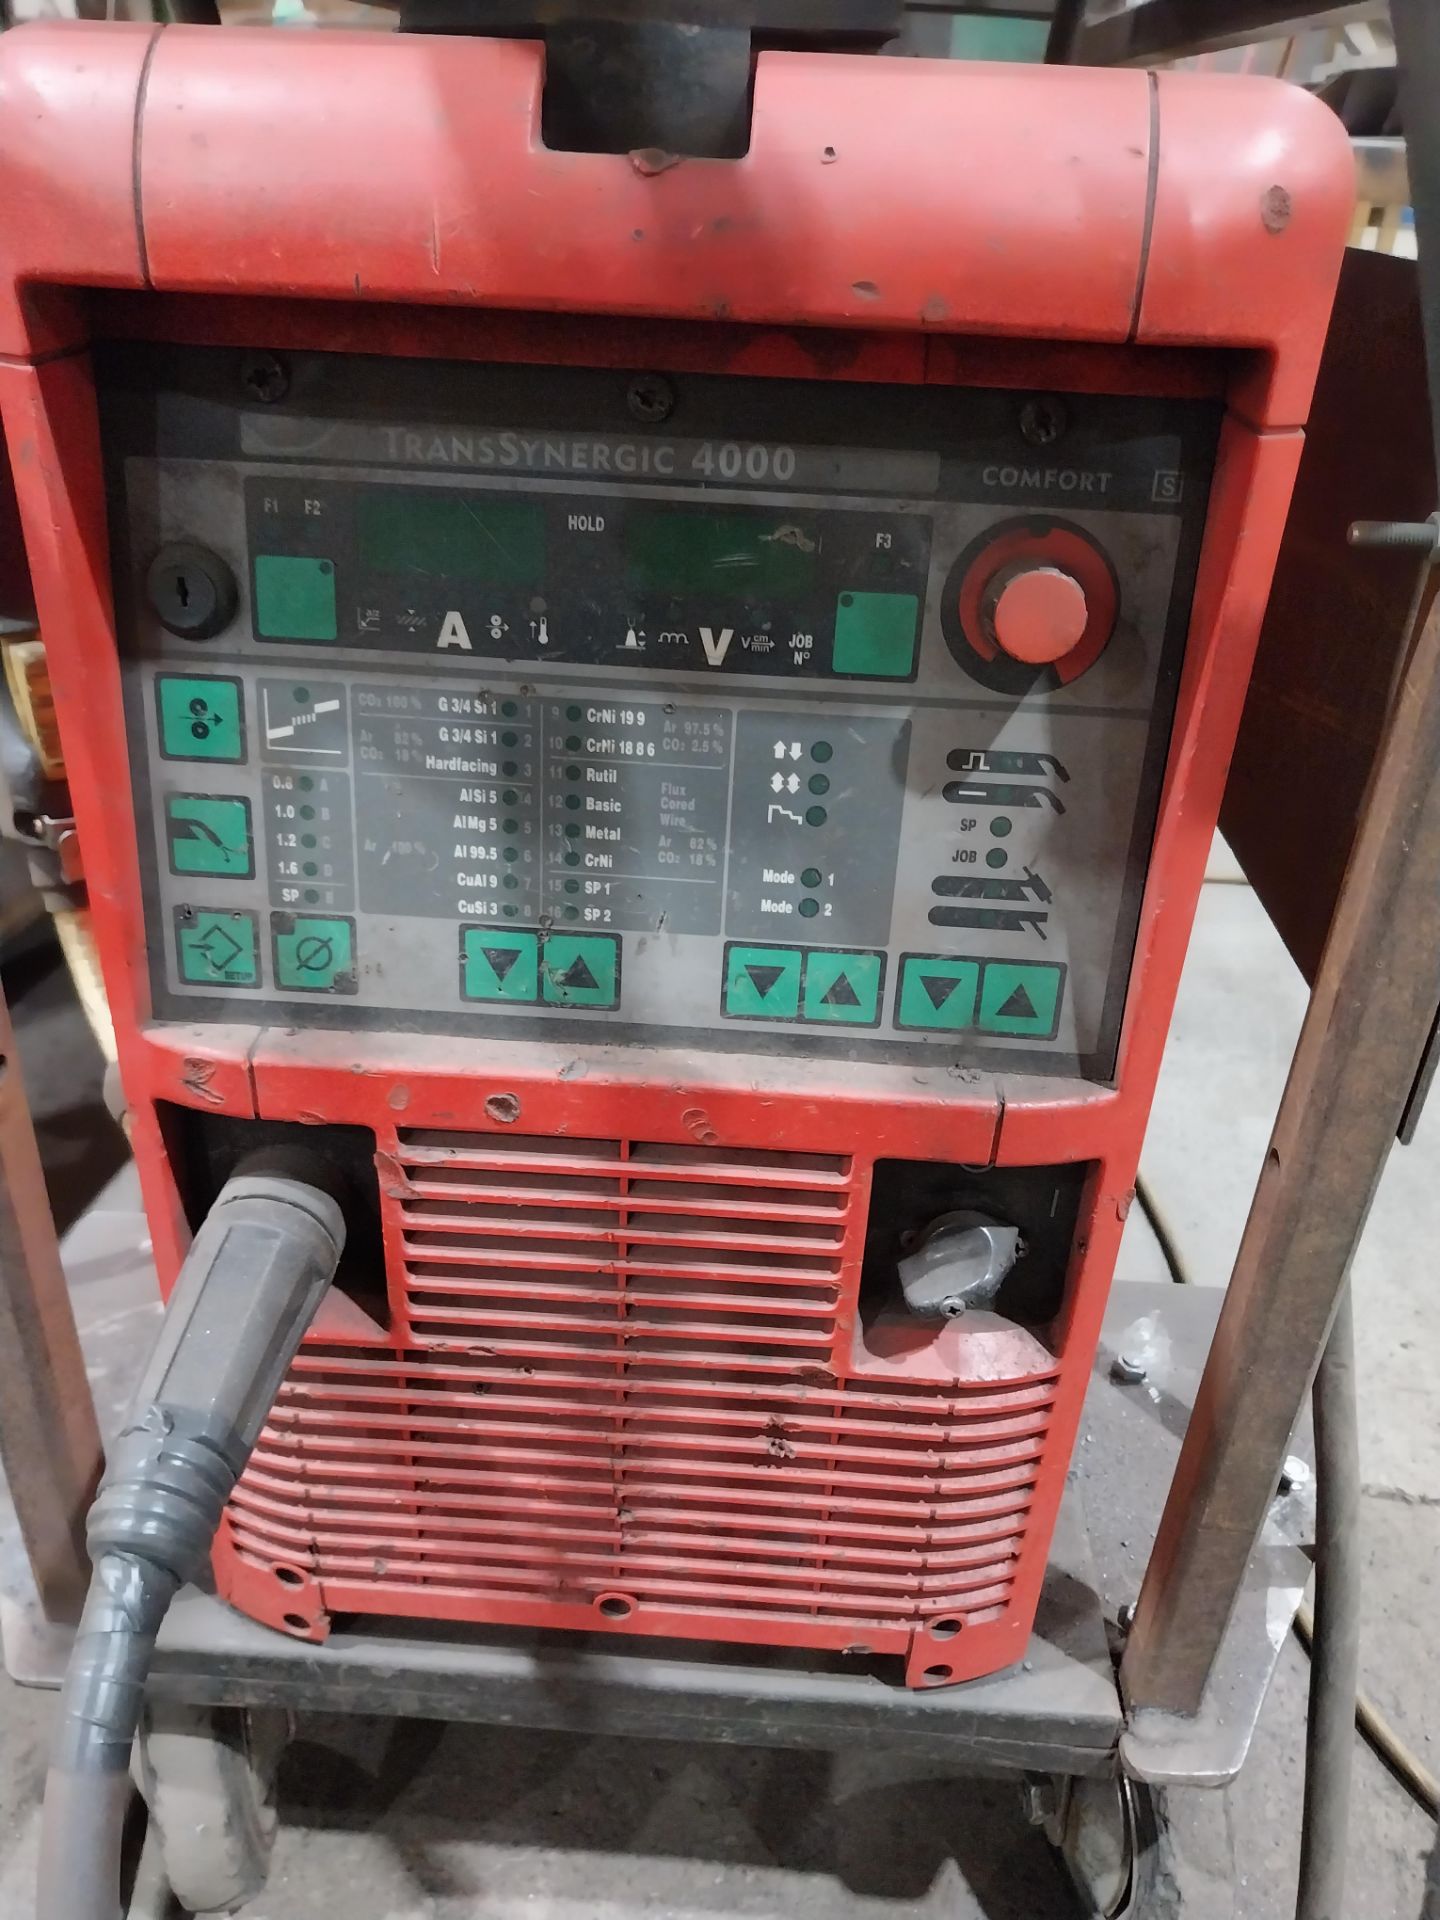 Fronius TransSynergic 4000 mig welder with VR4000 wire feed (bottle not included) - Image 2 of 5